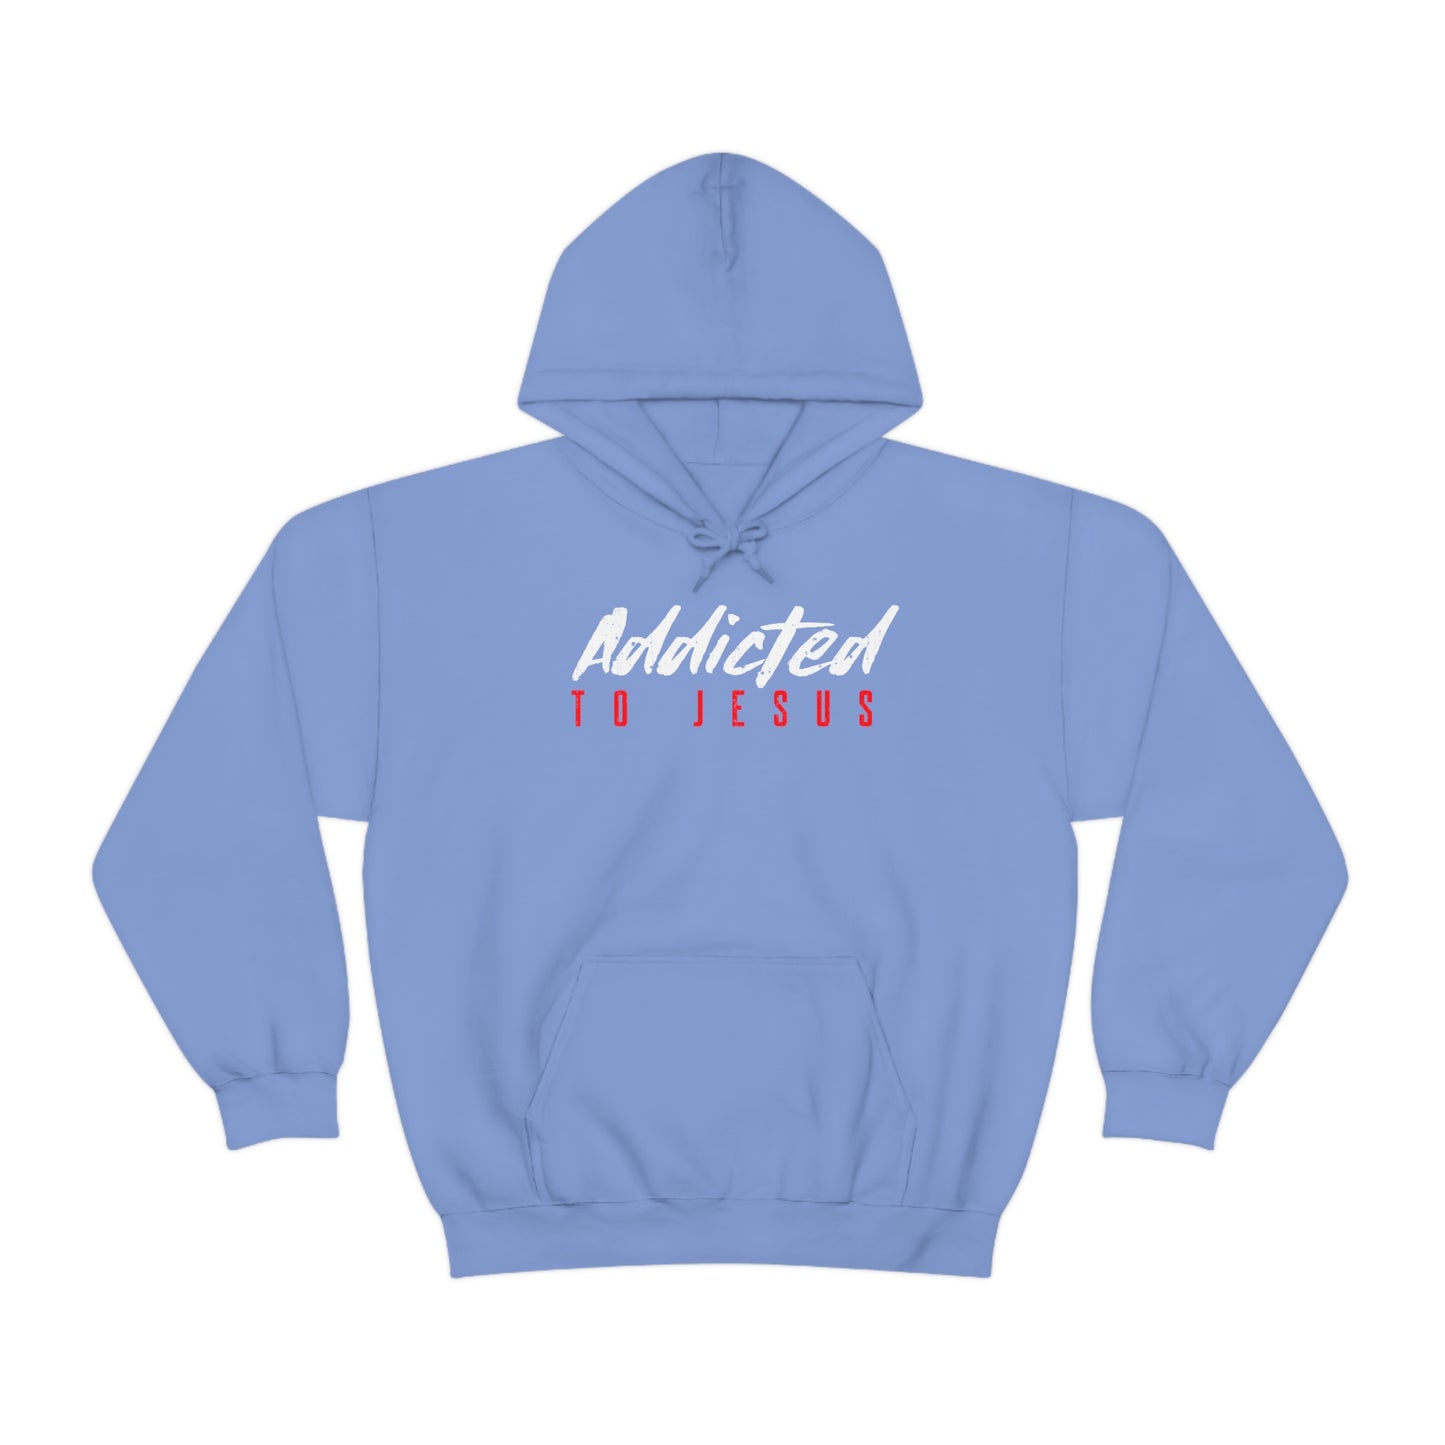 Addicted To Jesus Hoodie For Women